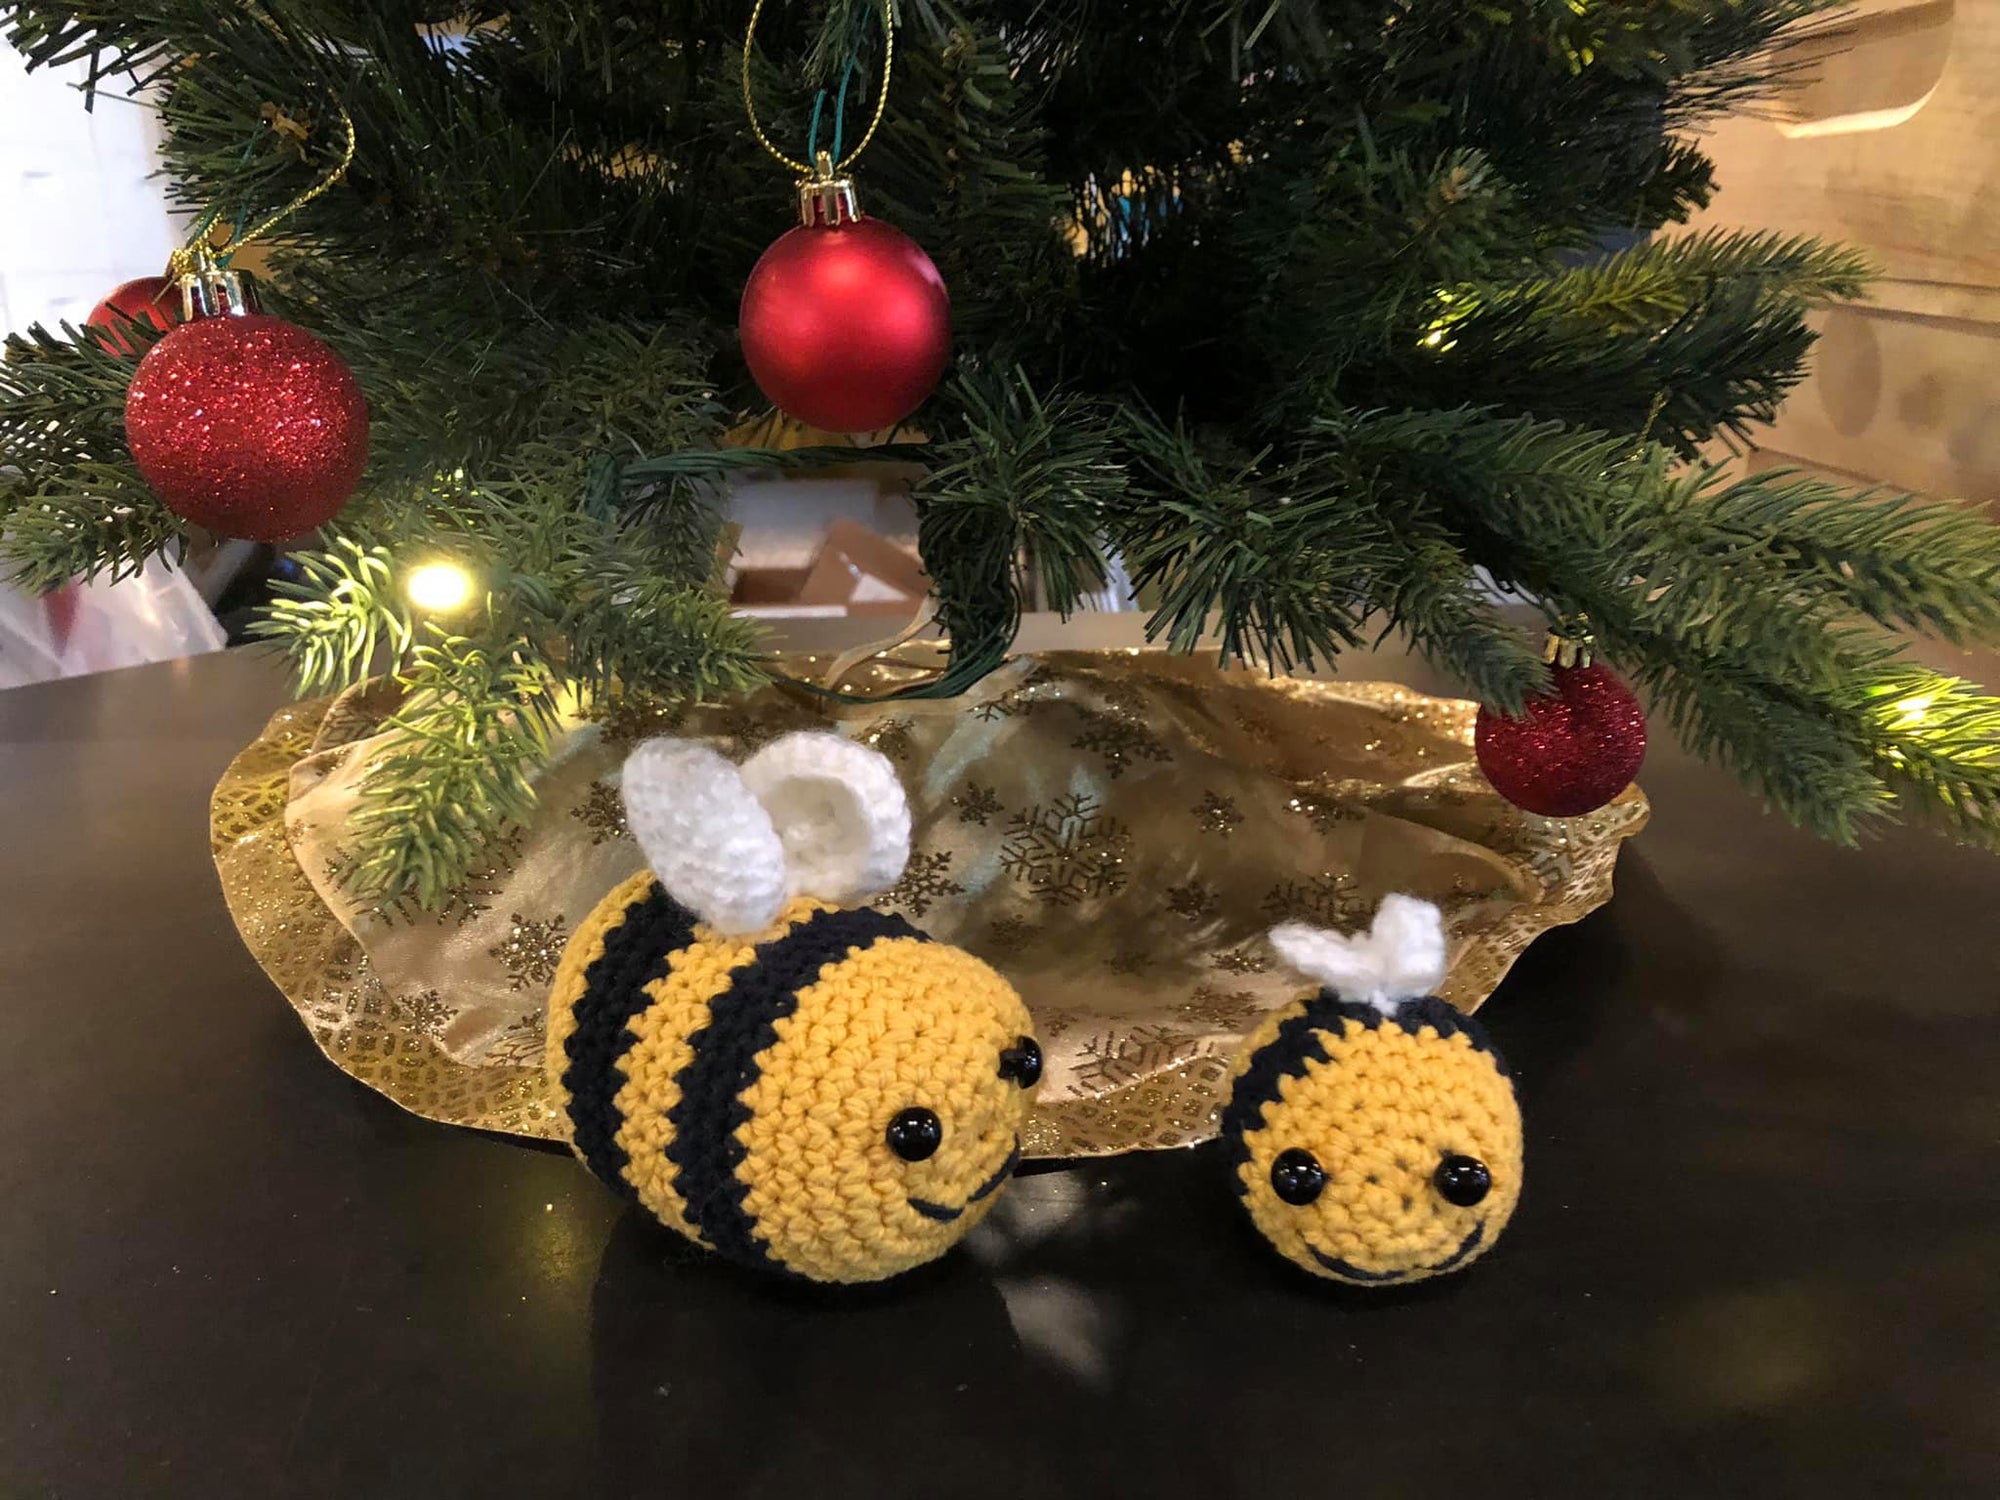 Crocheted Fat Bees